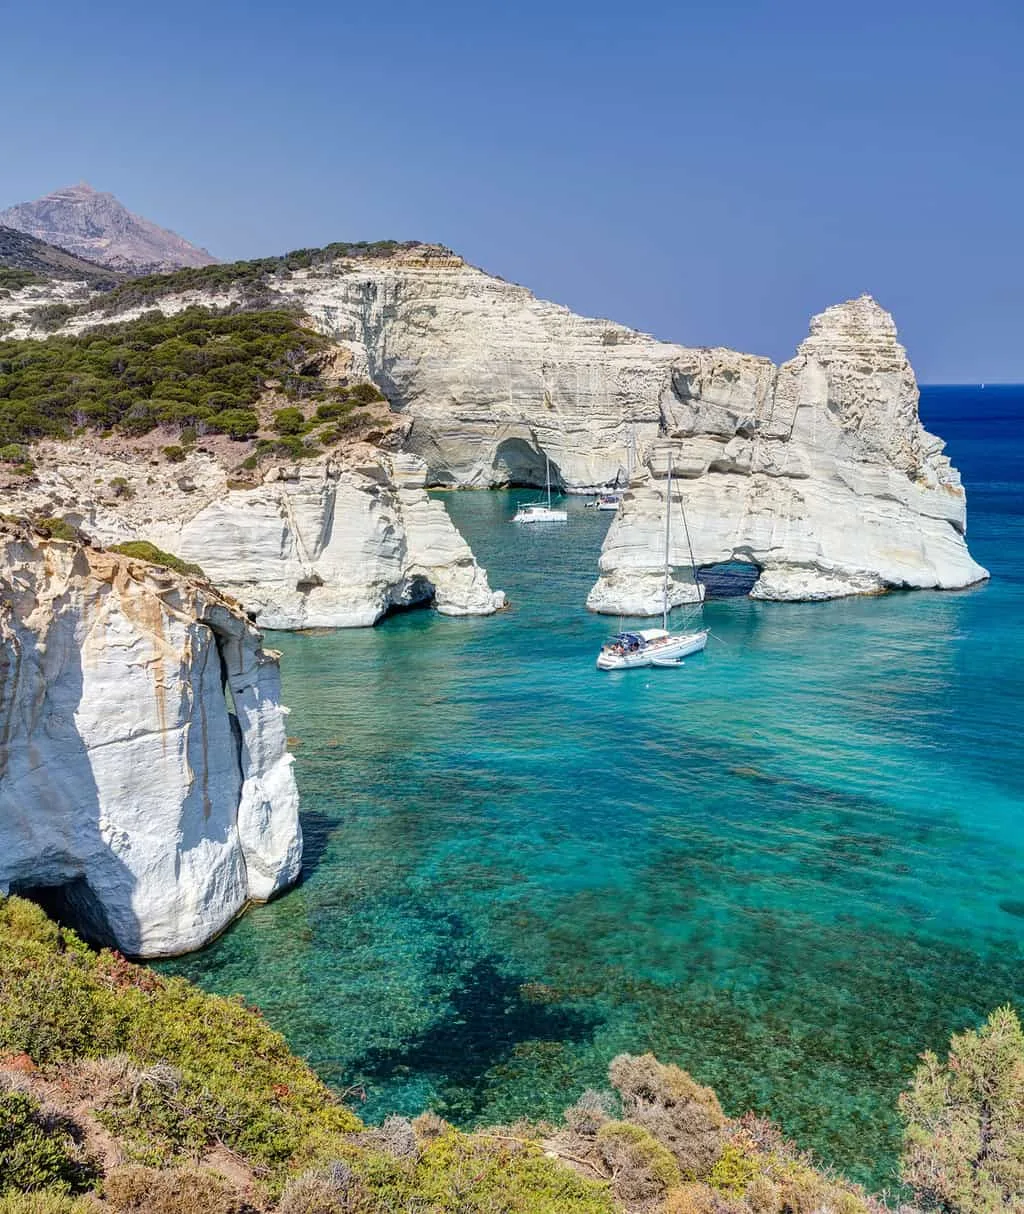 Boats anchored in crystal clear water surrounded by white cliffs on Milos Island Greece.